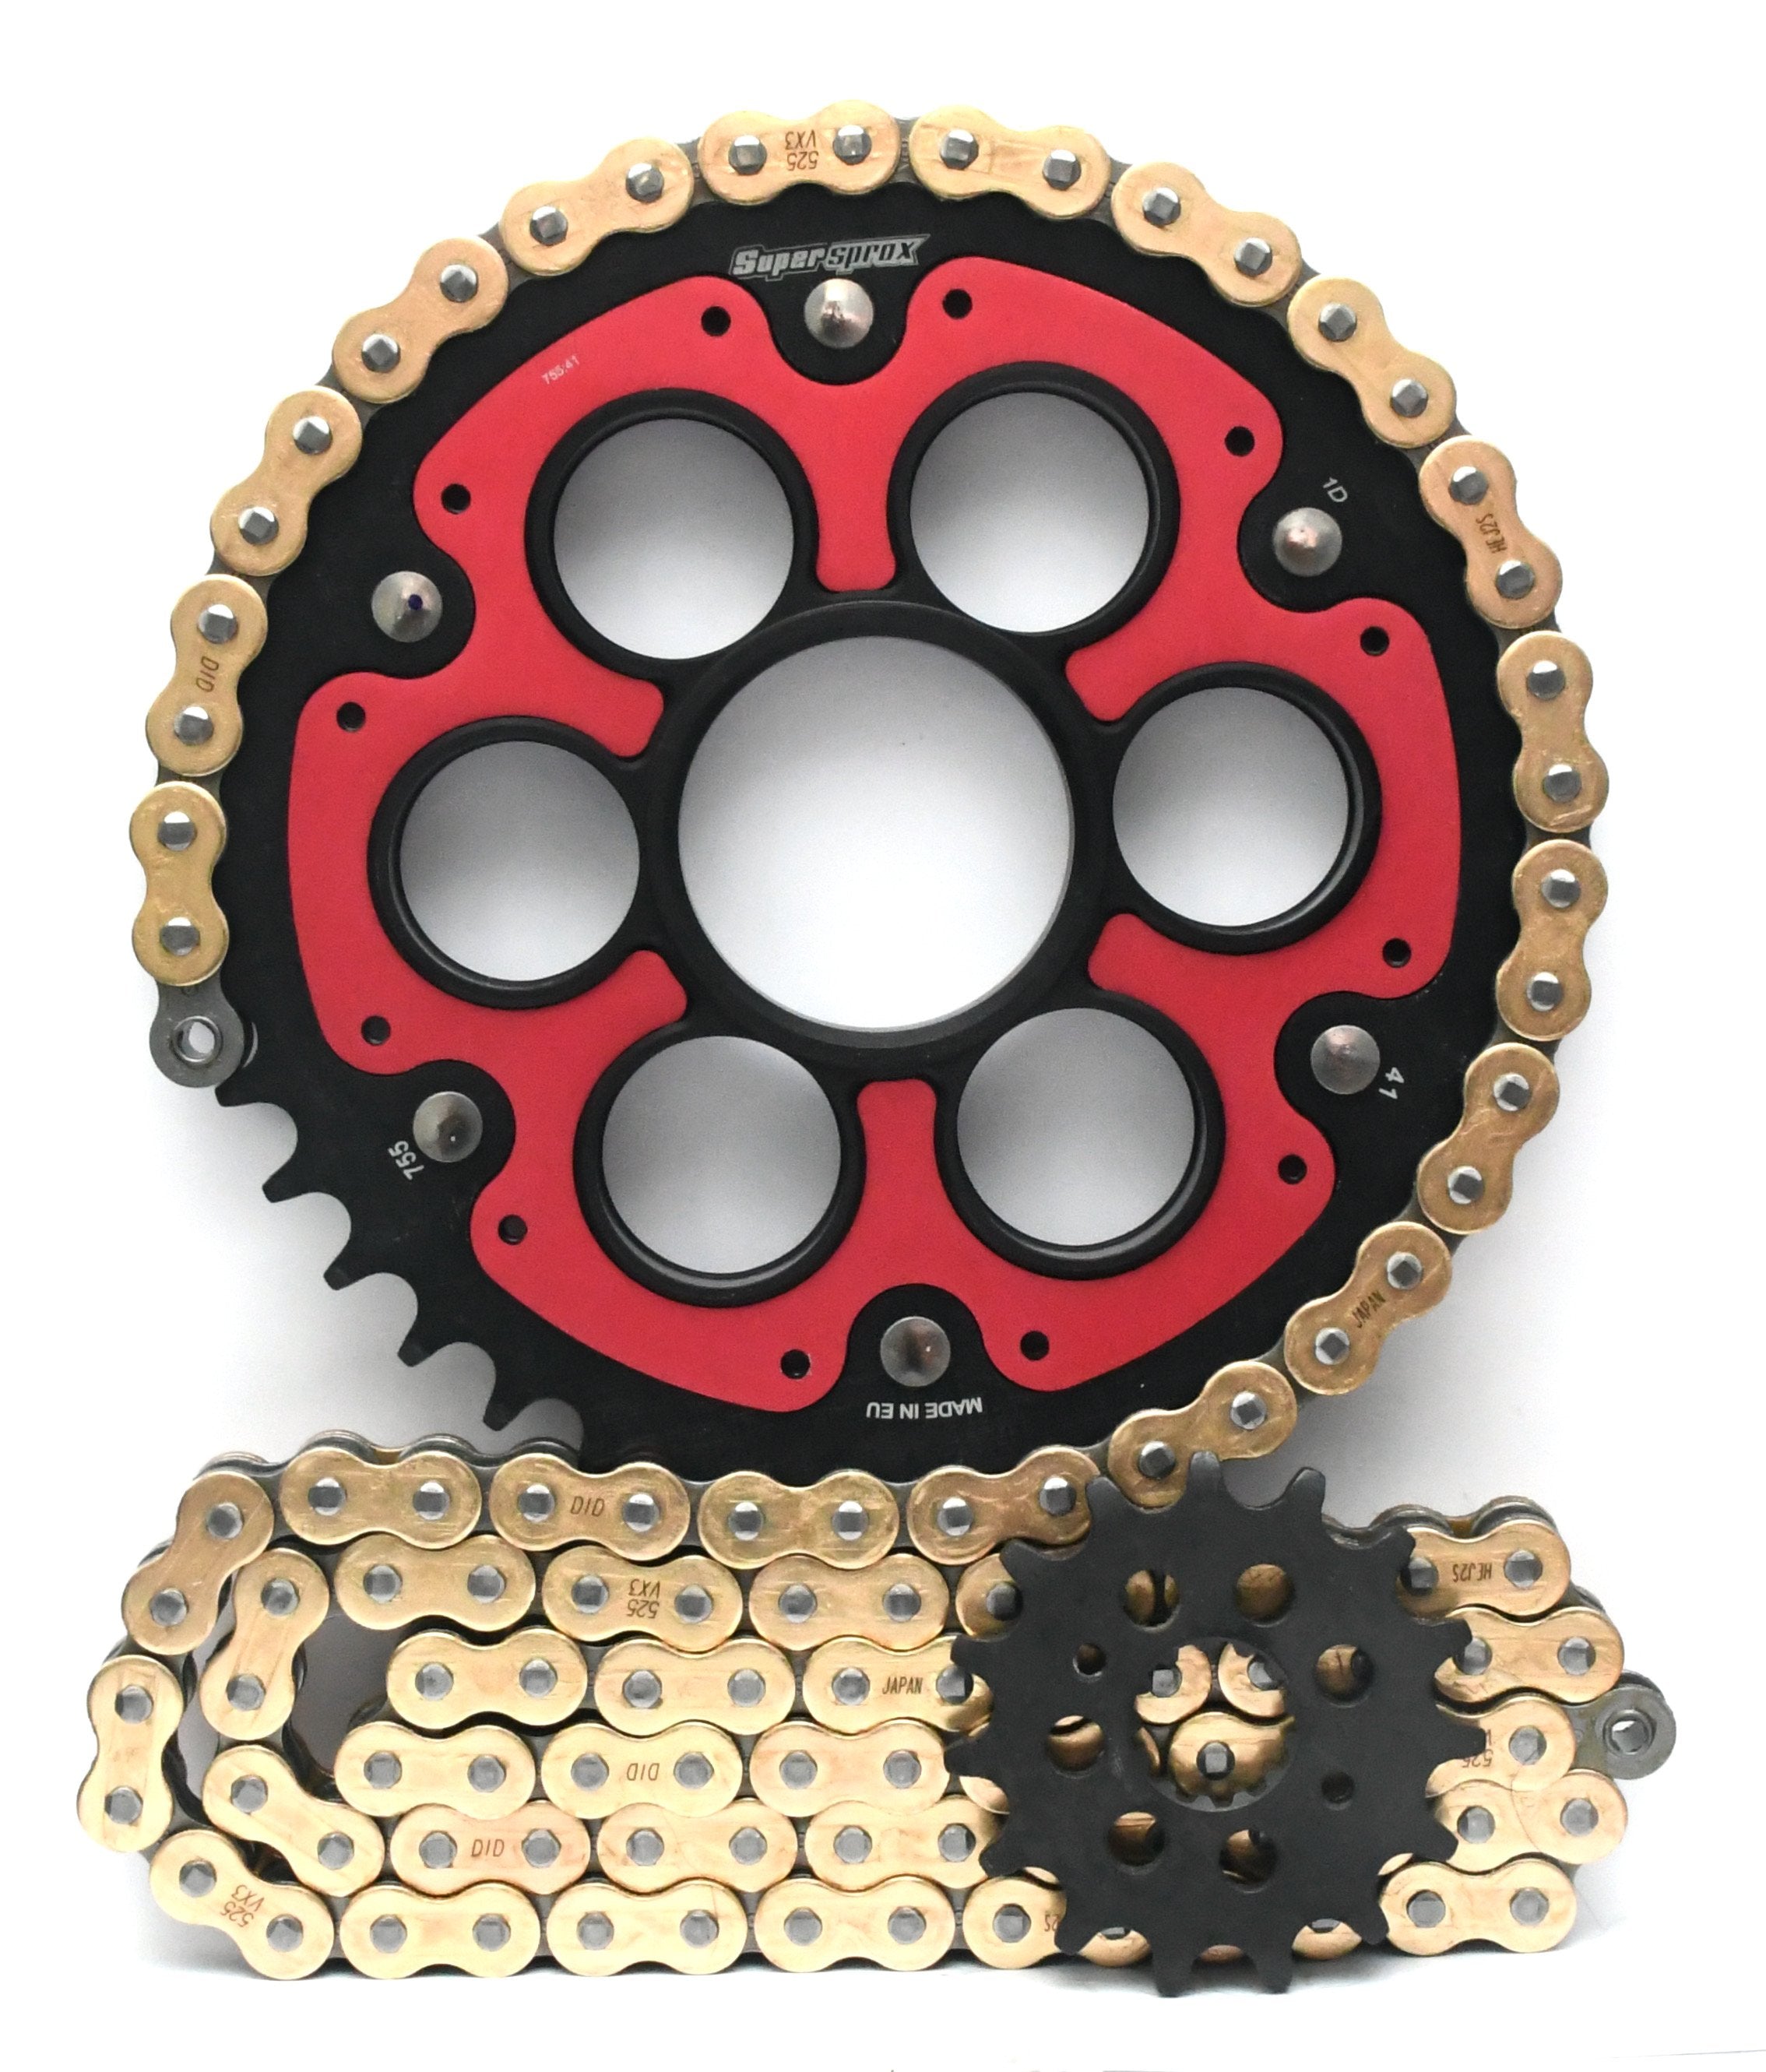 Supersprox Chain & Sprocket Kit for Ducati Diavel 1198 2011-2018 - Standard Gearing